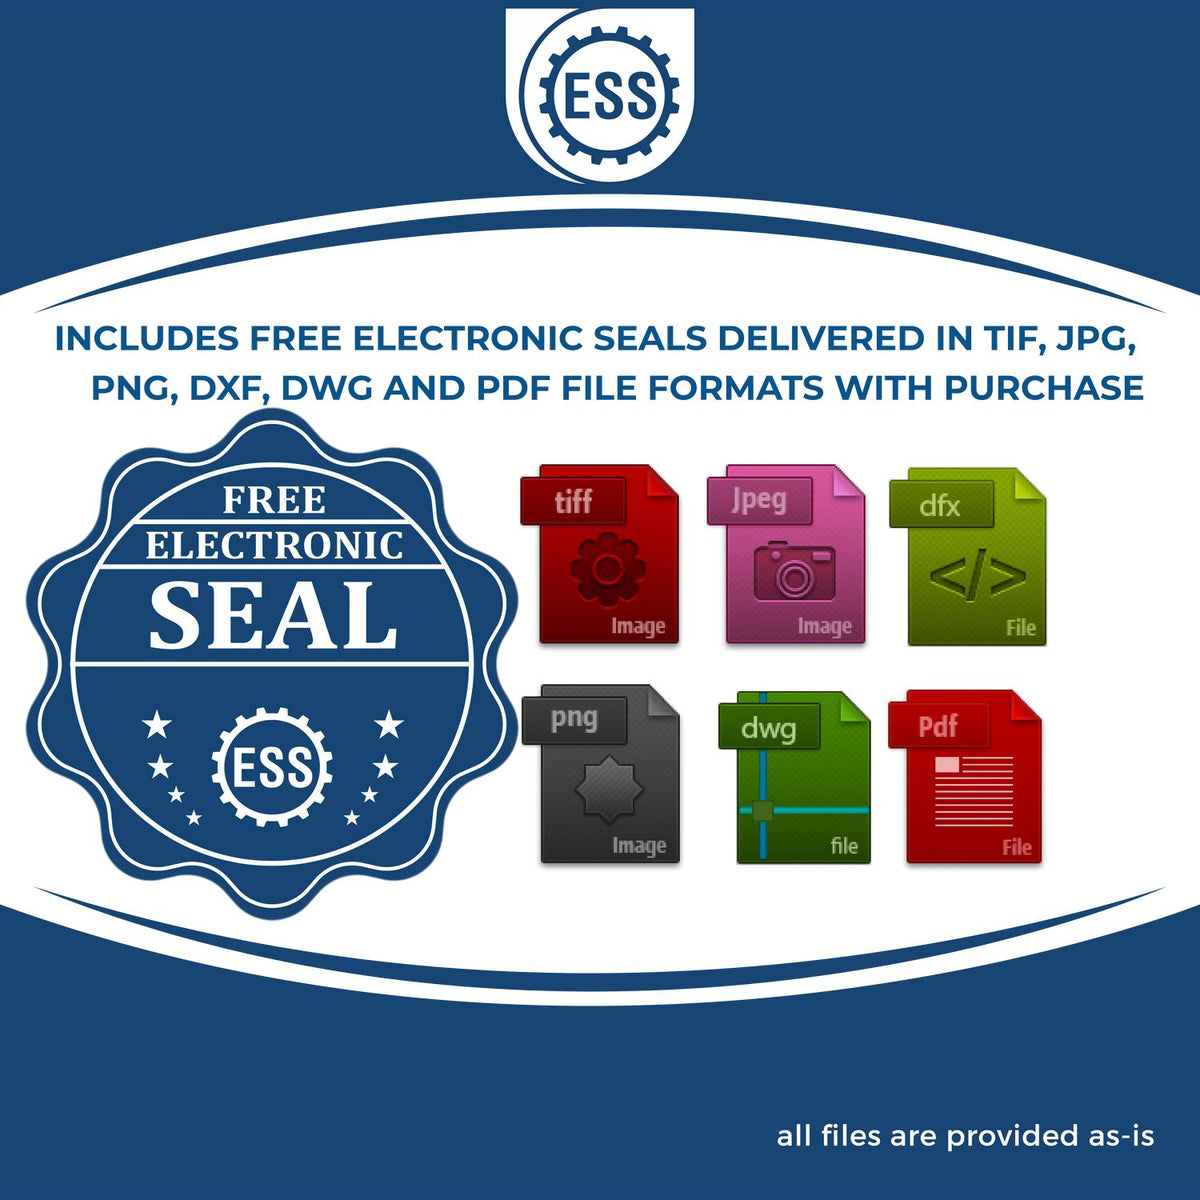 An infographic for the free electronic seal for the Premium MaxLight Pre-Inked Massachusetts Engineering Stamp illustrating the different file type icons such as DXF, DWG, TIF, JPG and PNG.